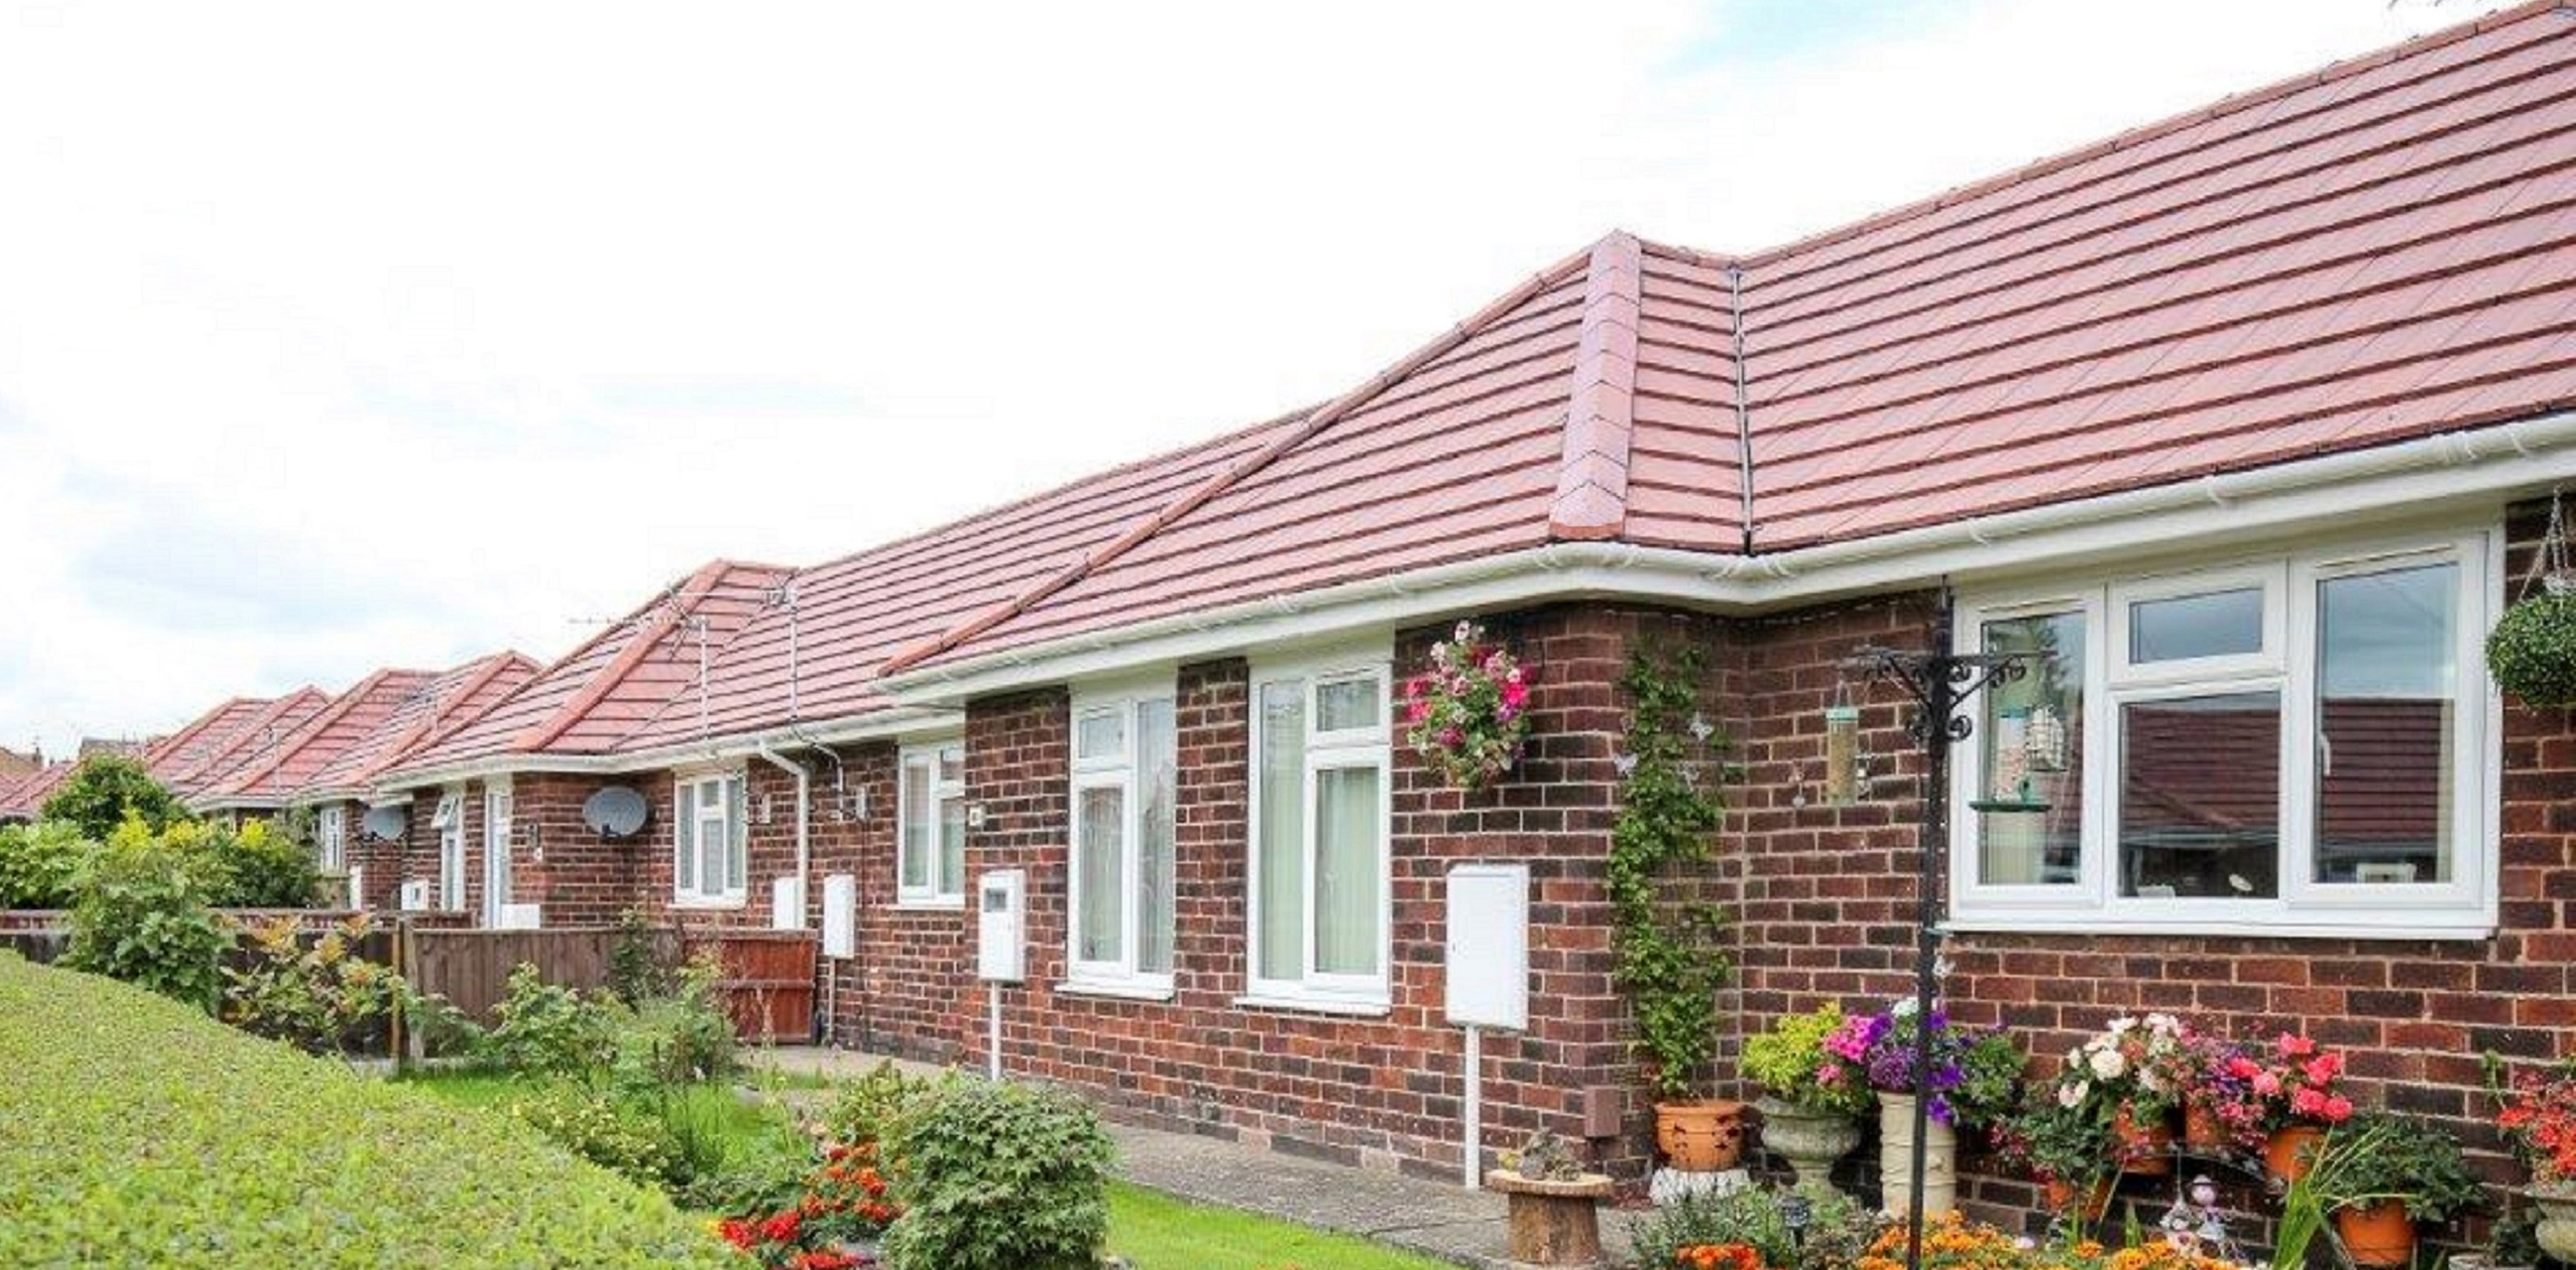 Russell Roof Tiles advises contractors to get re-roofing advice